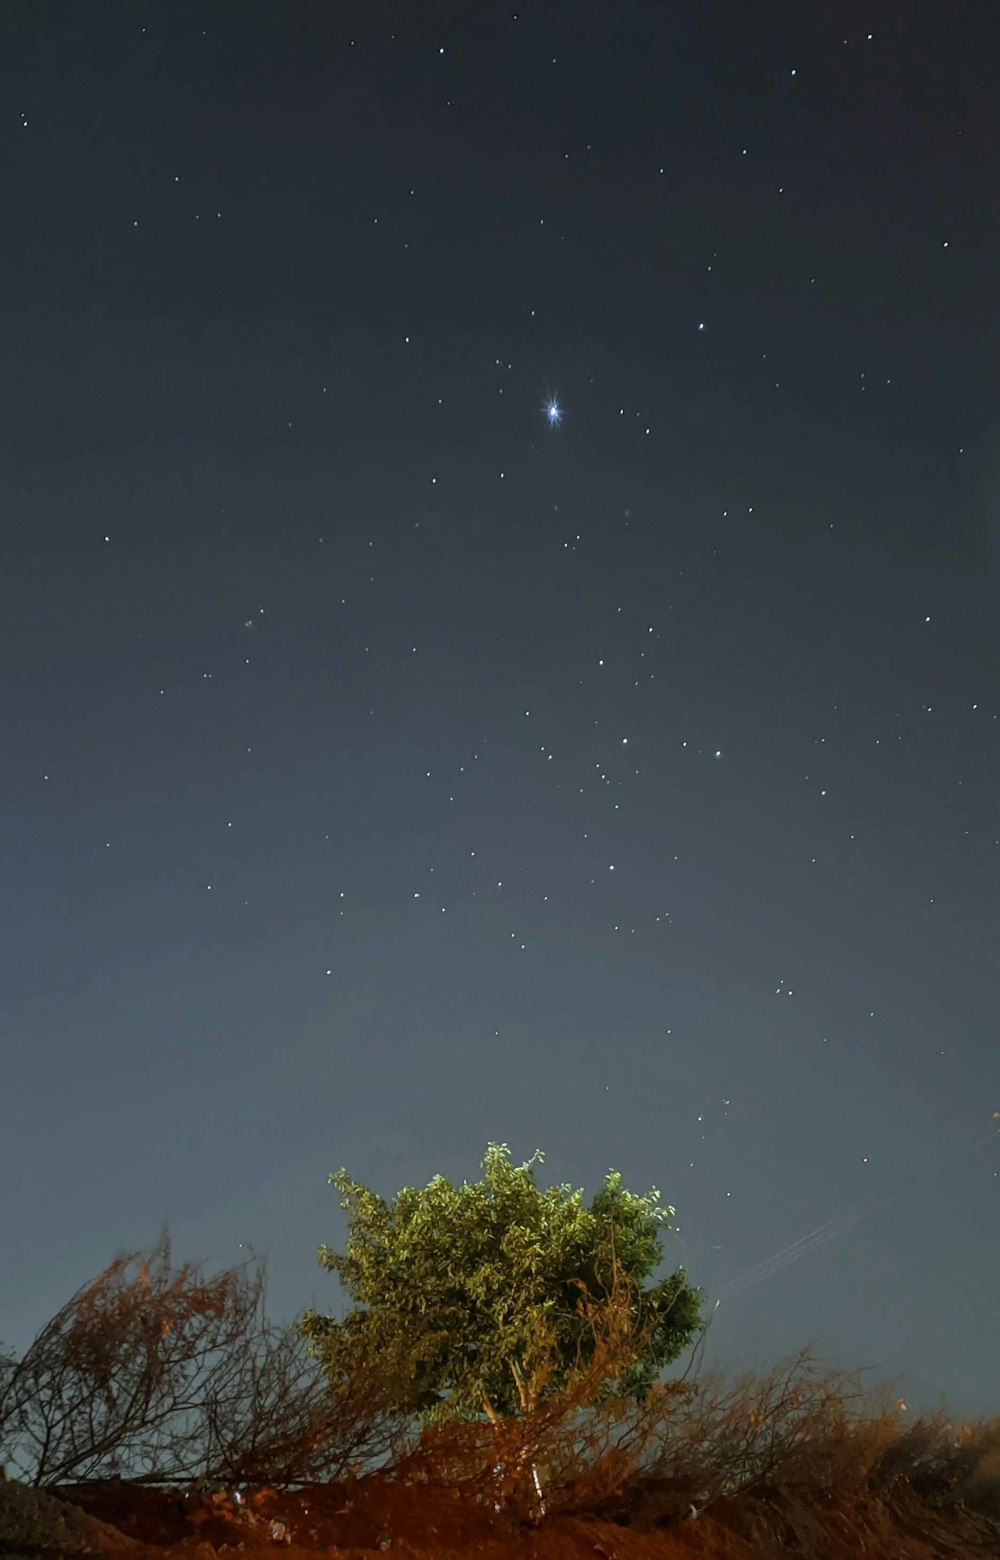 a lone tree in the middle of a desert at night